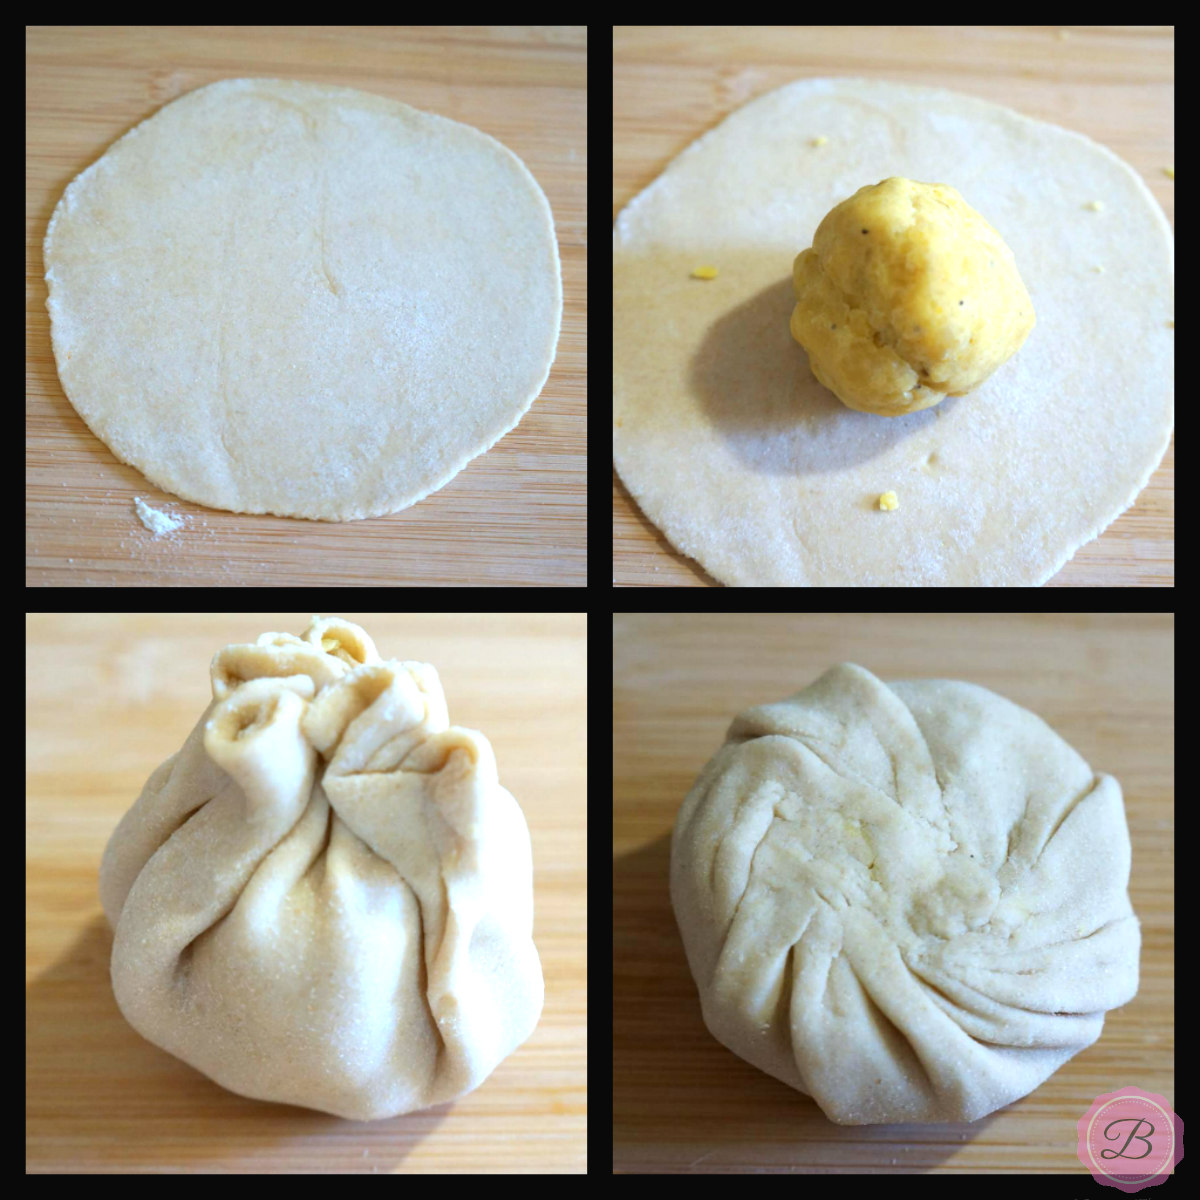 Steps Showing how to Stuff Puran into the dough (Flatbread)